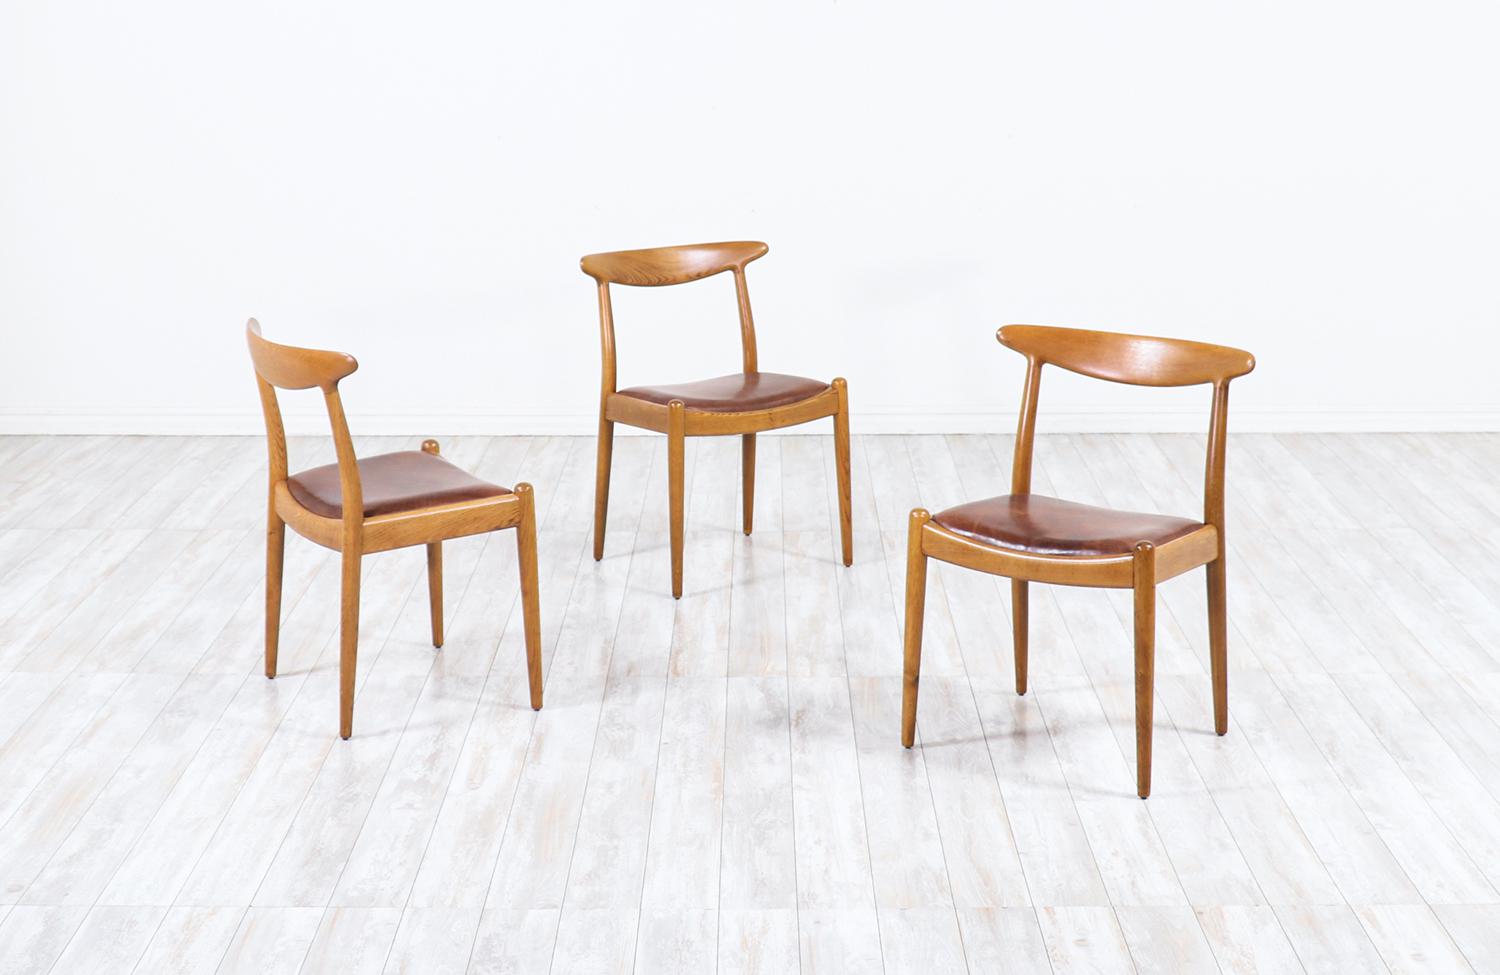 Danish Hans J. Wegner W2 Oak and Leather Dining Chairs for C.M. Madsen